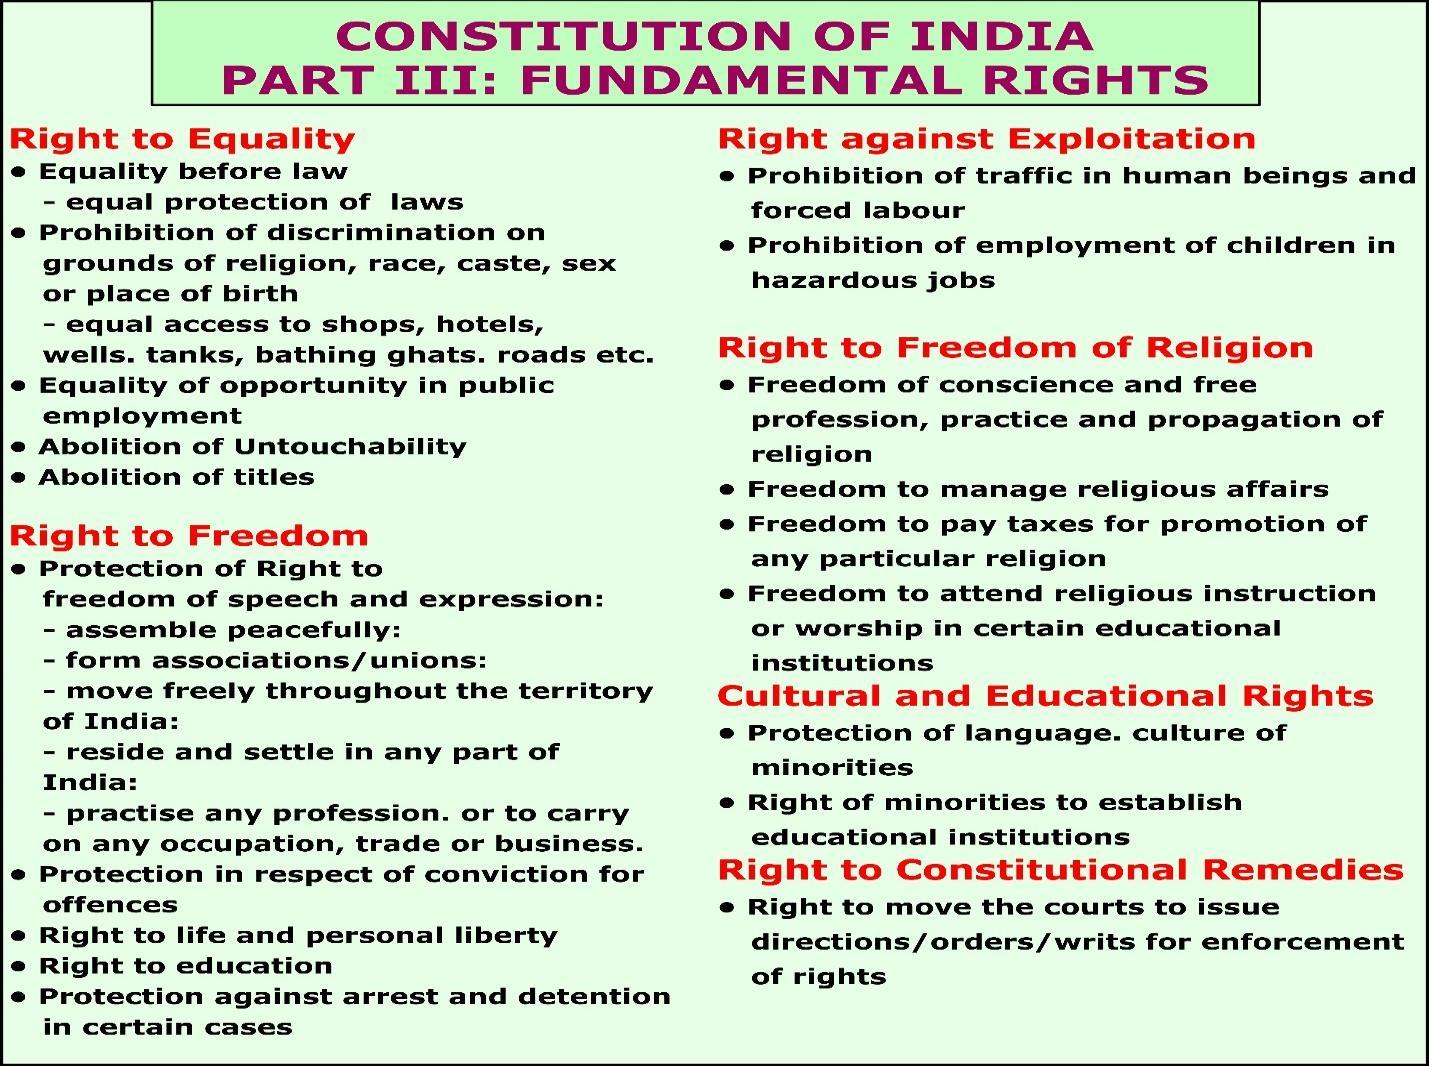 hypothesis of fundamental rights